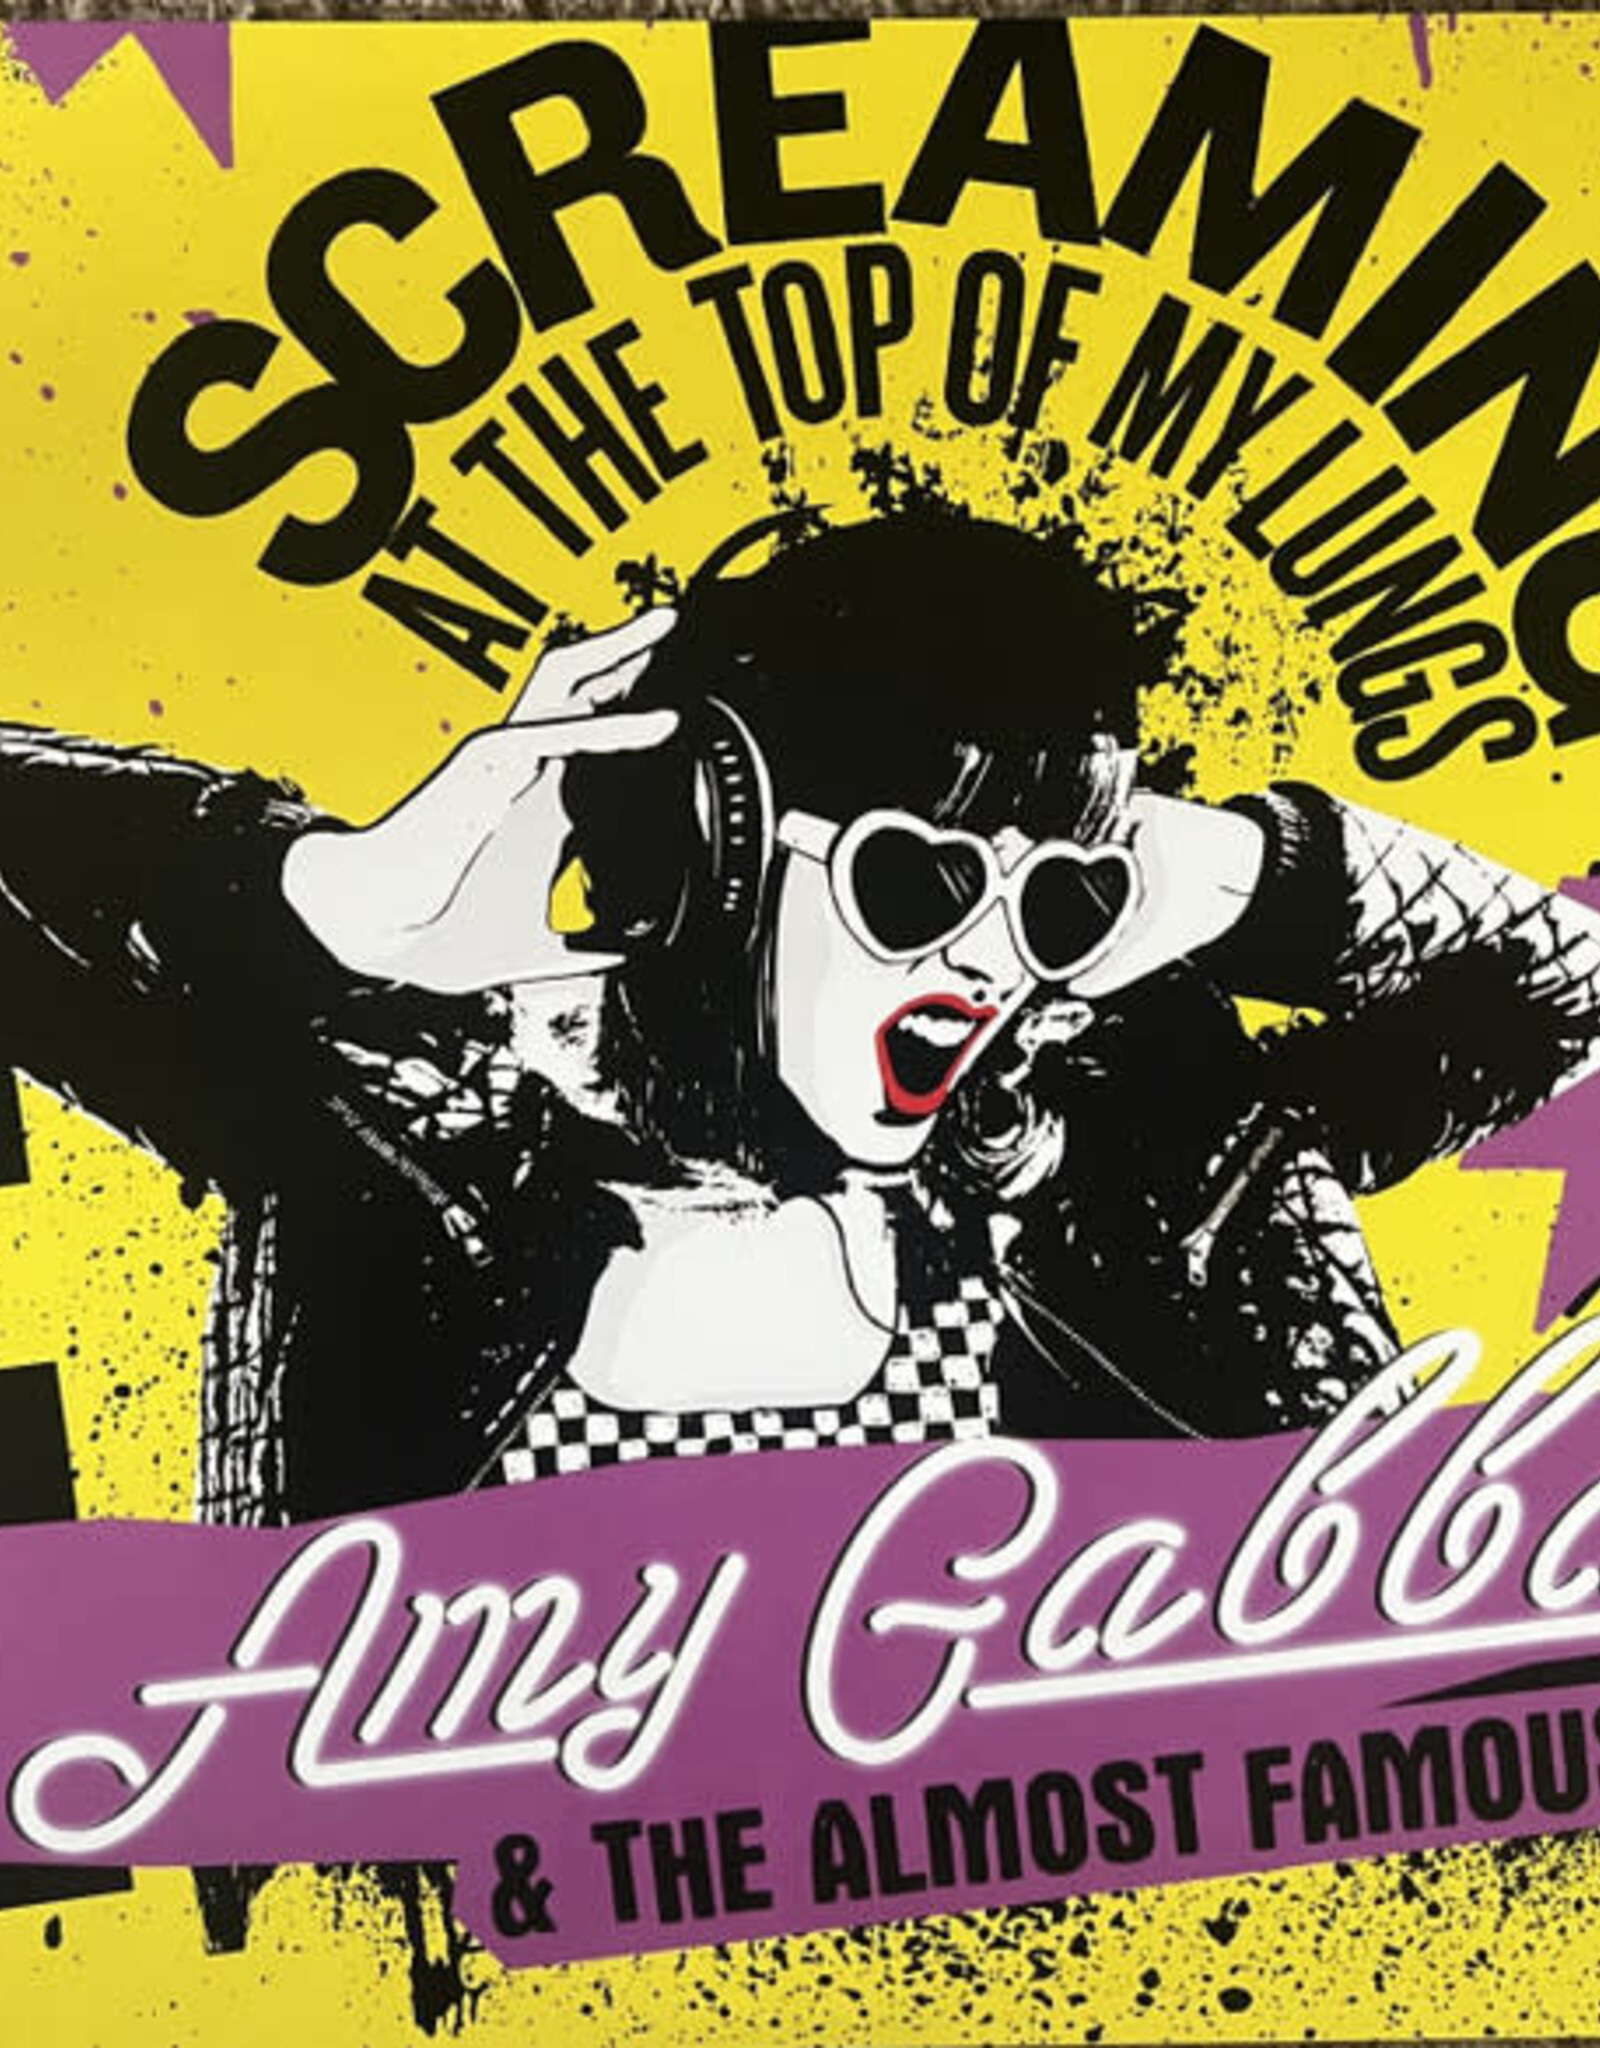 Amy Gabba And The Almost Famous – Screaming At The Top Of My Lungs